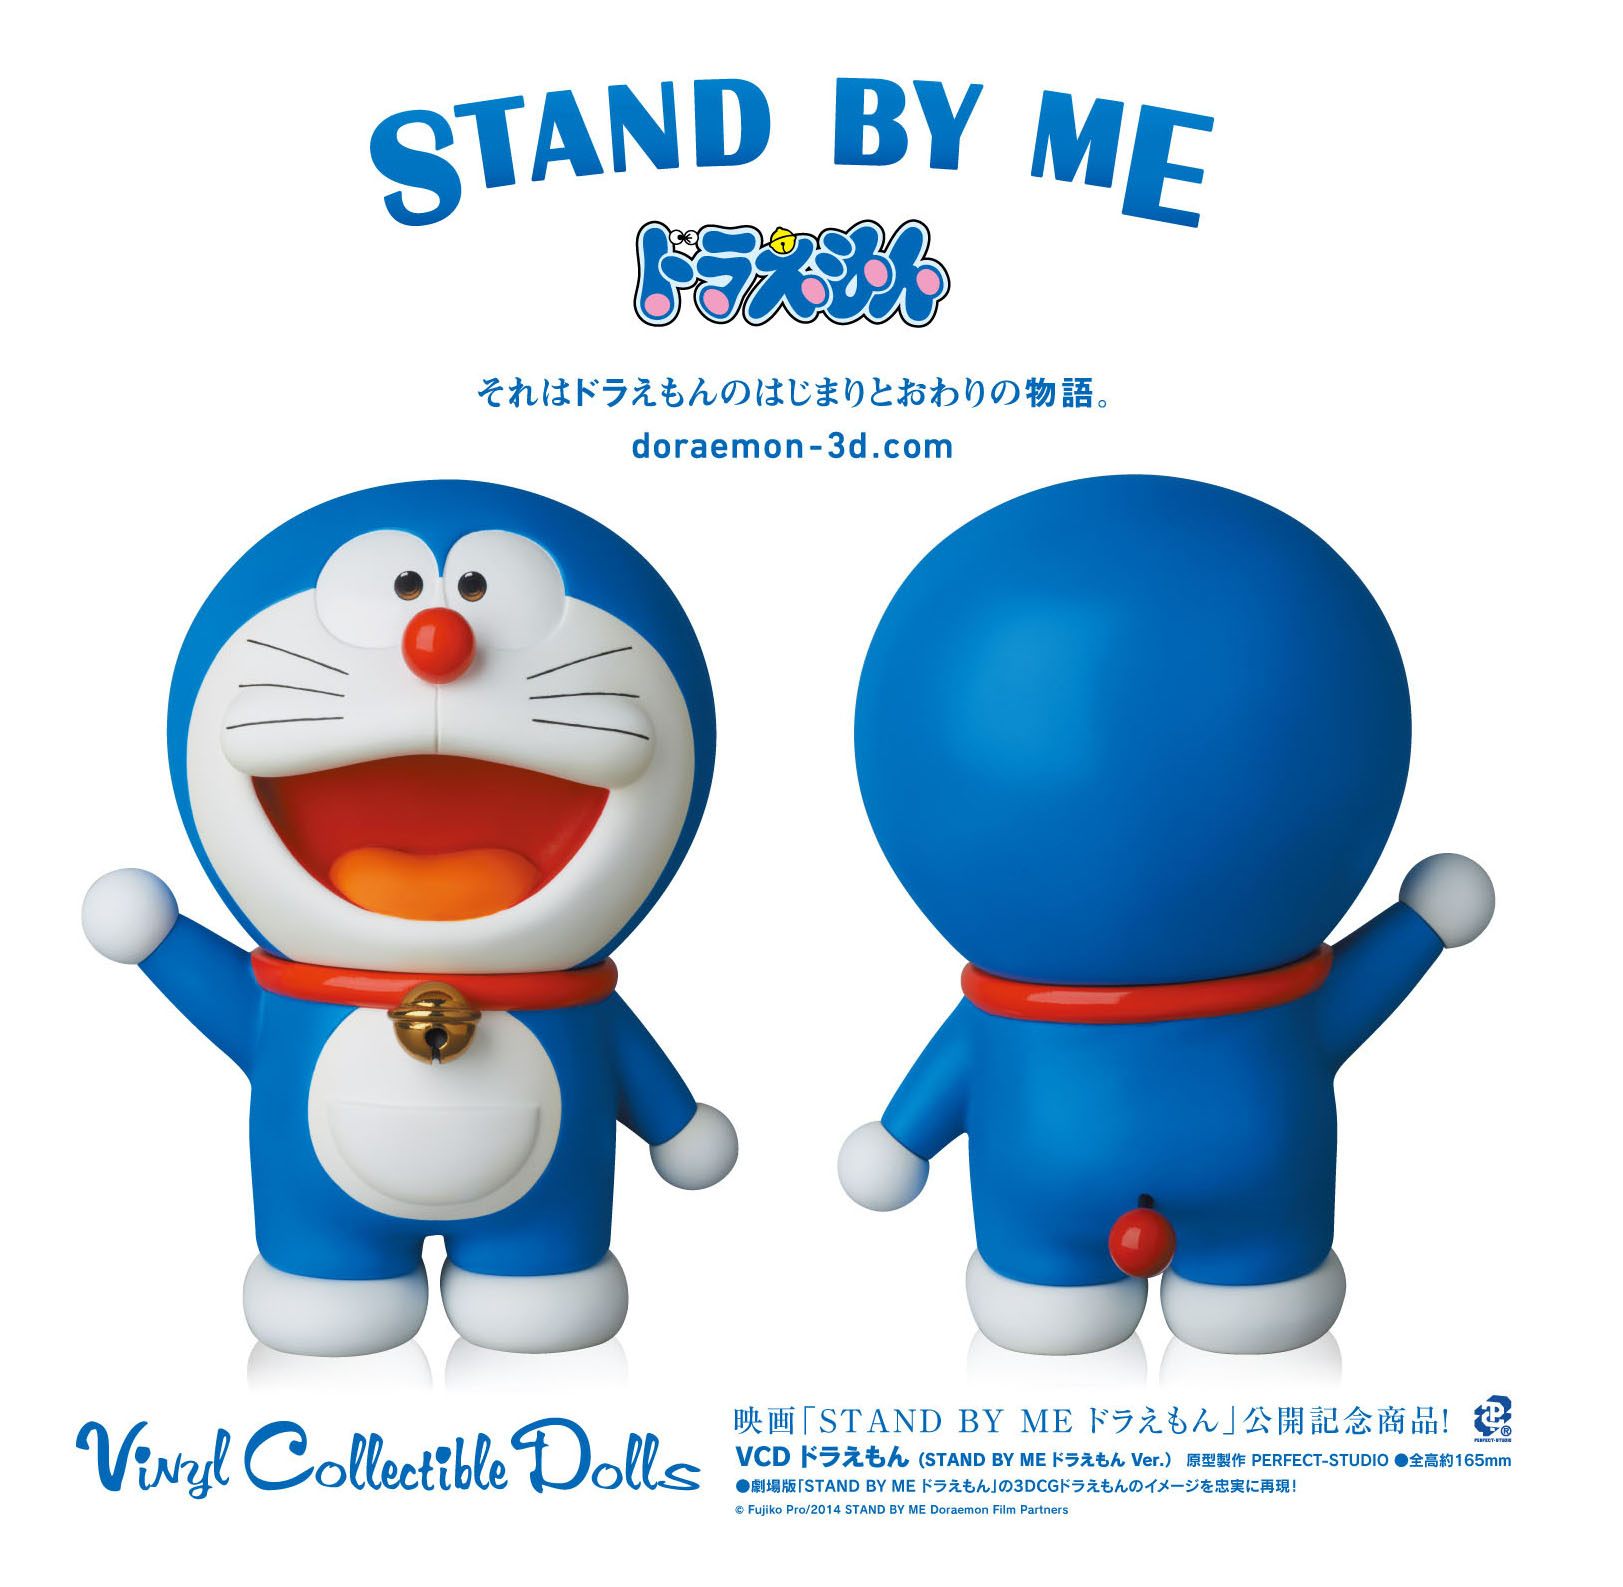 Stand By Me Doraemon Movie HD Wallpaper